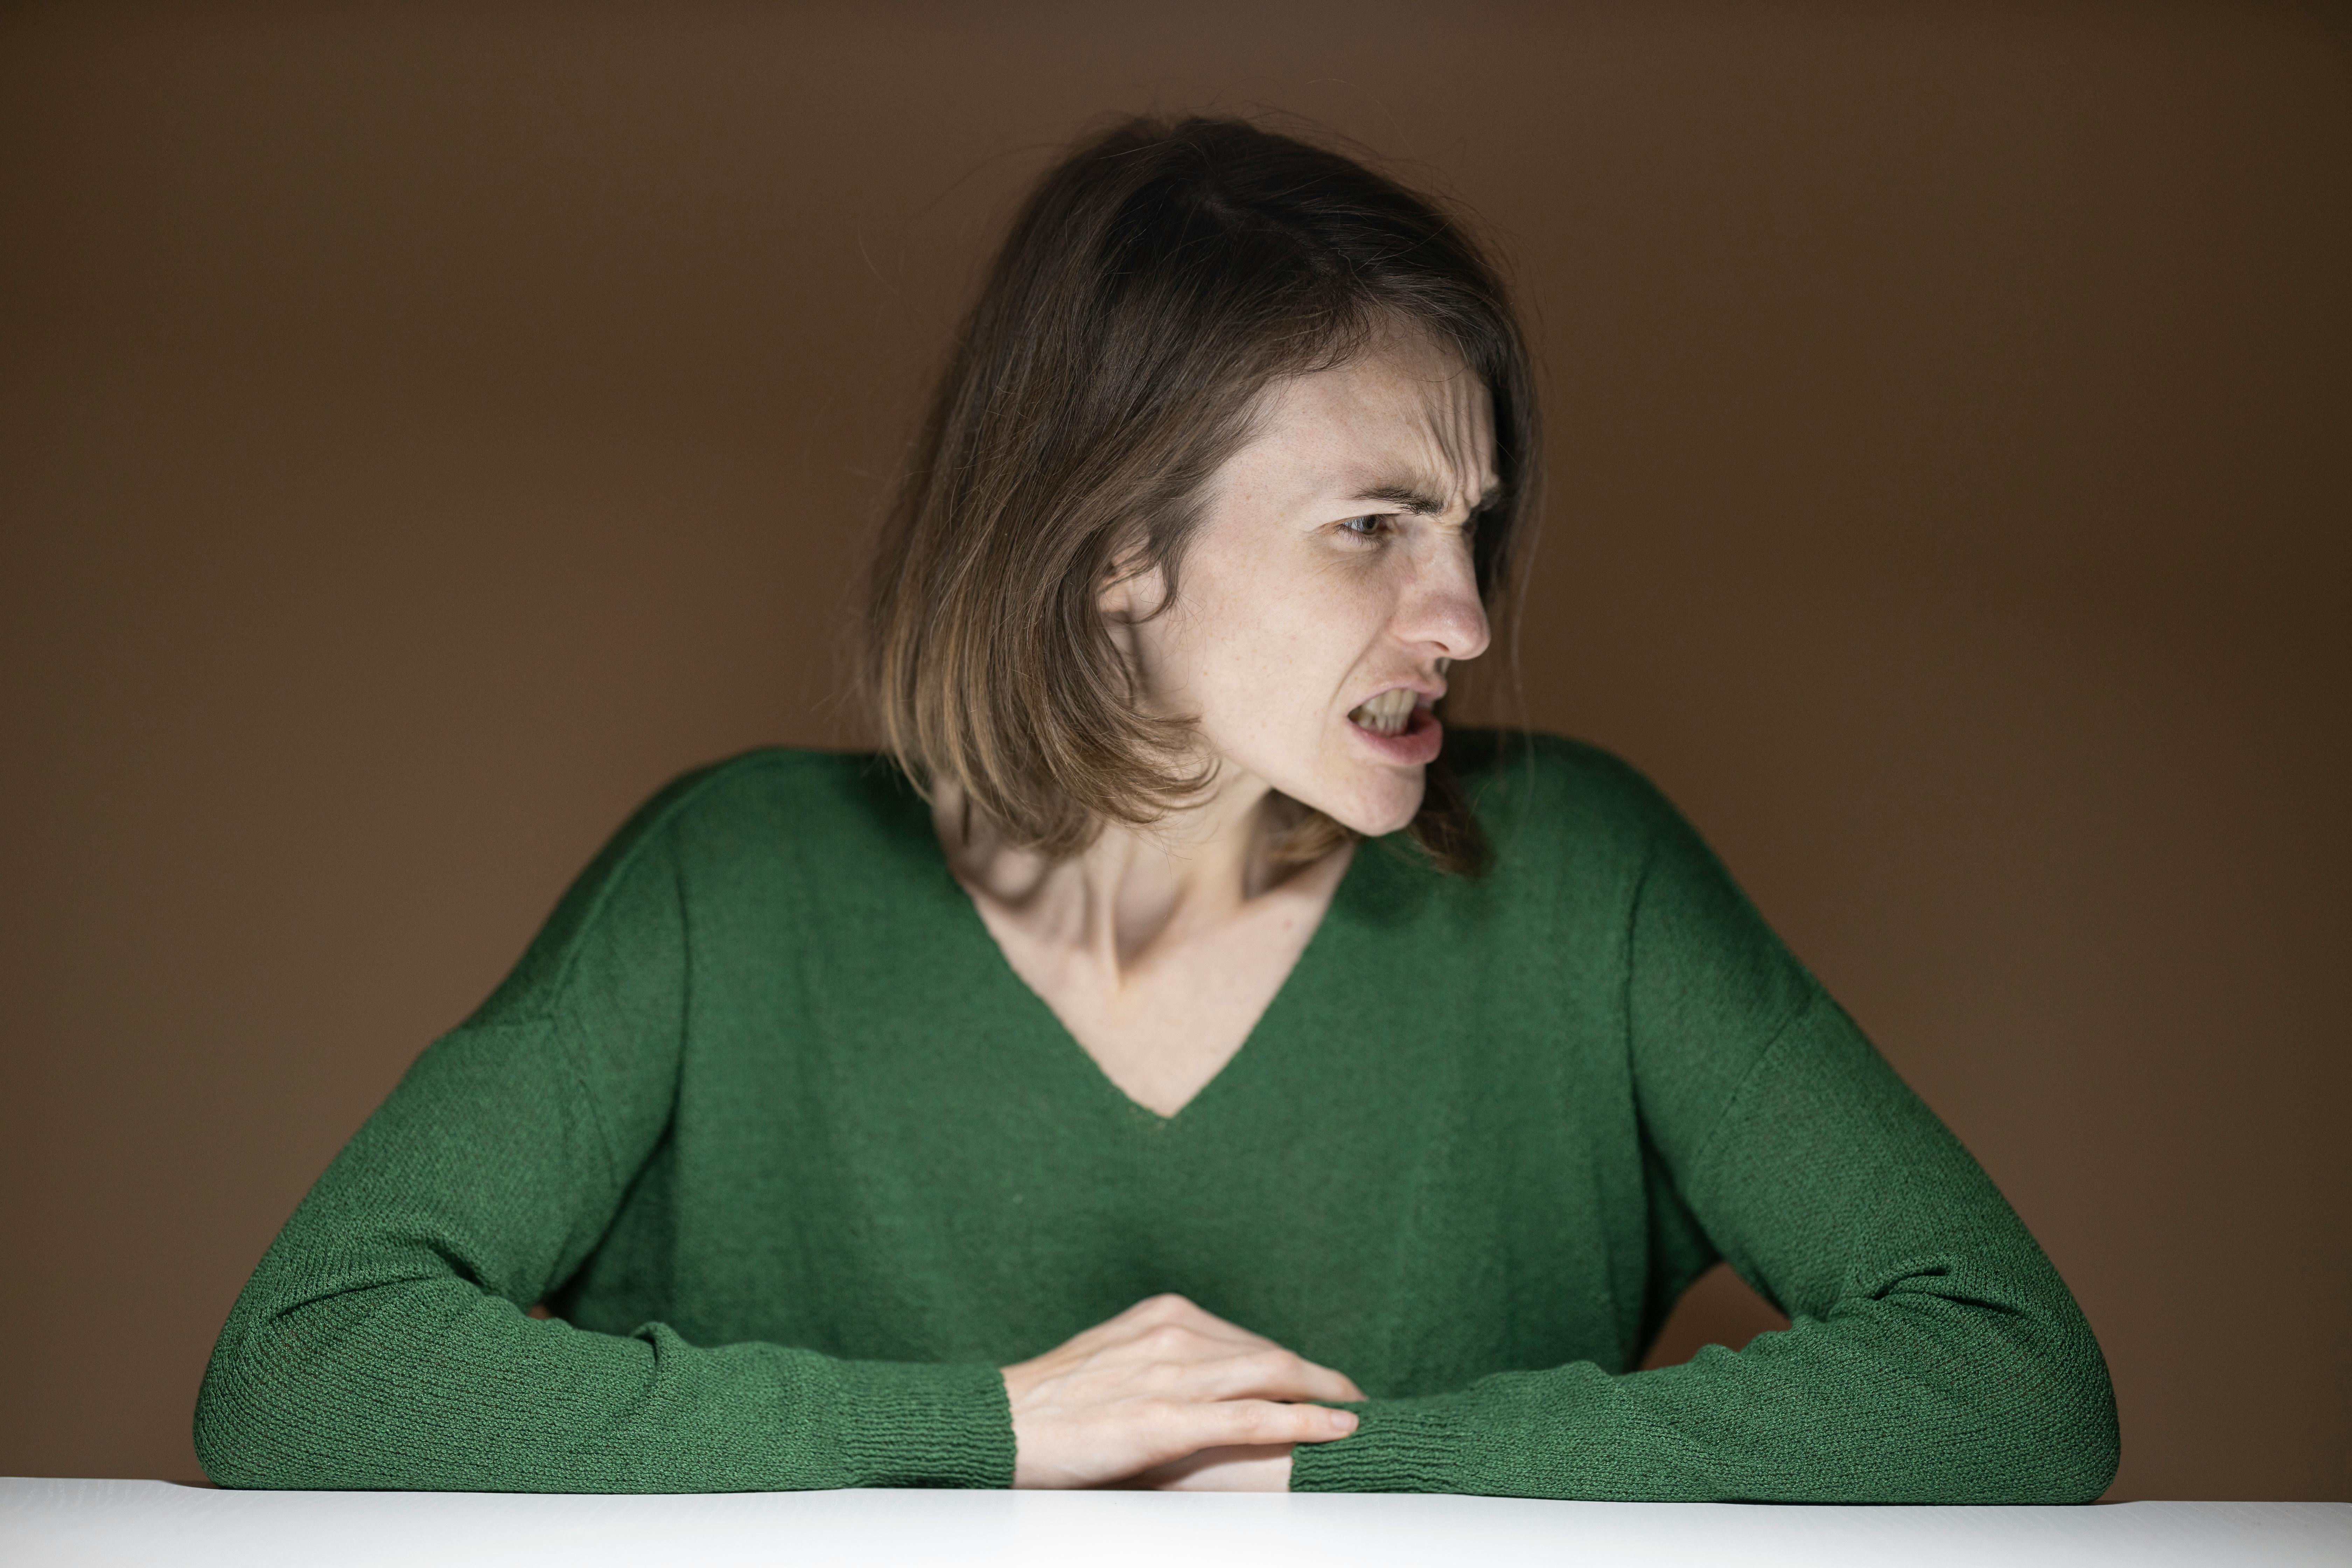 Angry woman leaning on a table. | Photo: Pexels